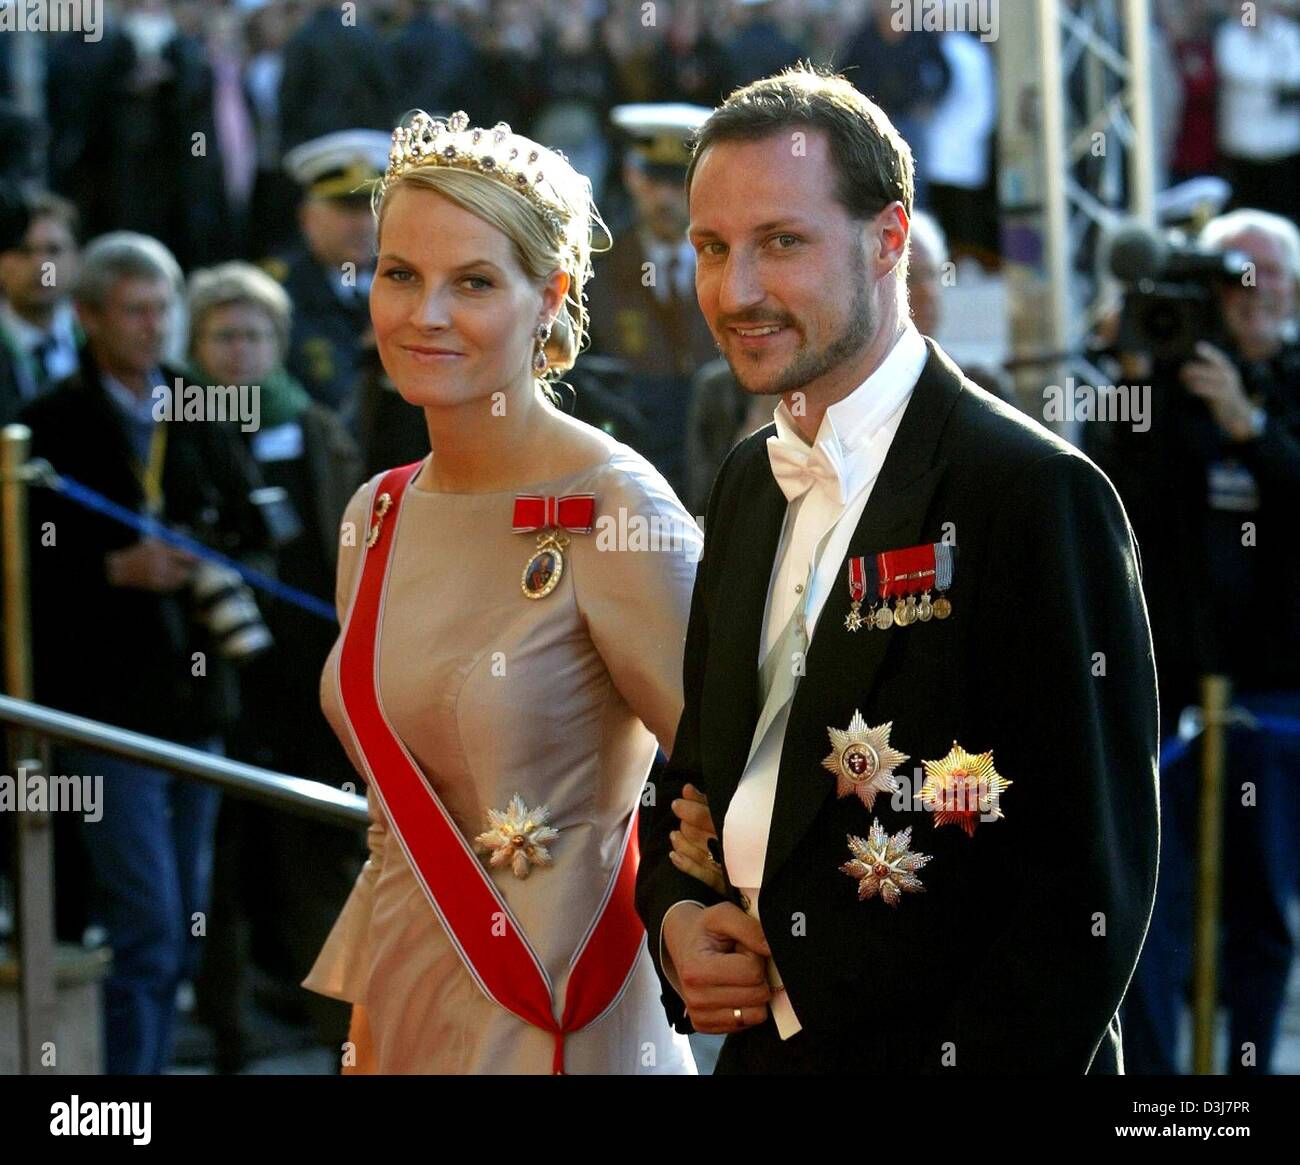 (dpa) - On the eve of the wedding of Crown Prince Frederik of Denmark and Mary Donaldson, Crown Princess Mette-Marit and Crown Prince Haakon of Norway arrive for a gala at the Royal Theatre in Copenhagen, Denmark, 13 May 2004. Stock Photo